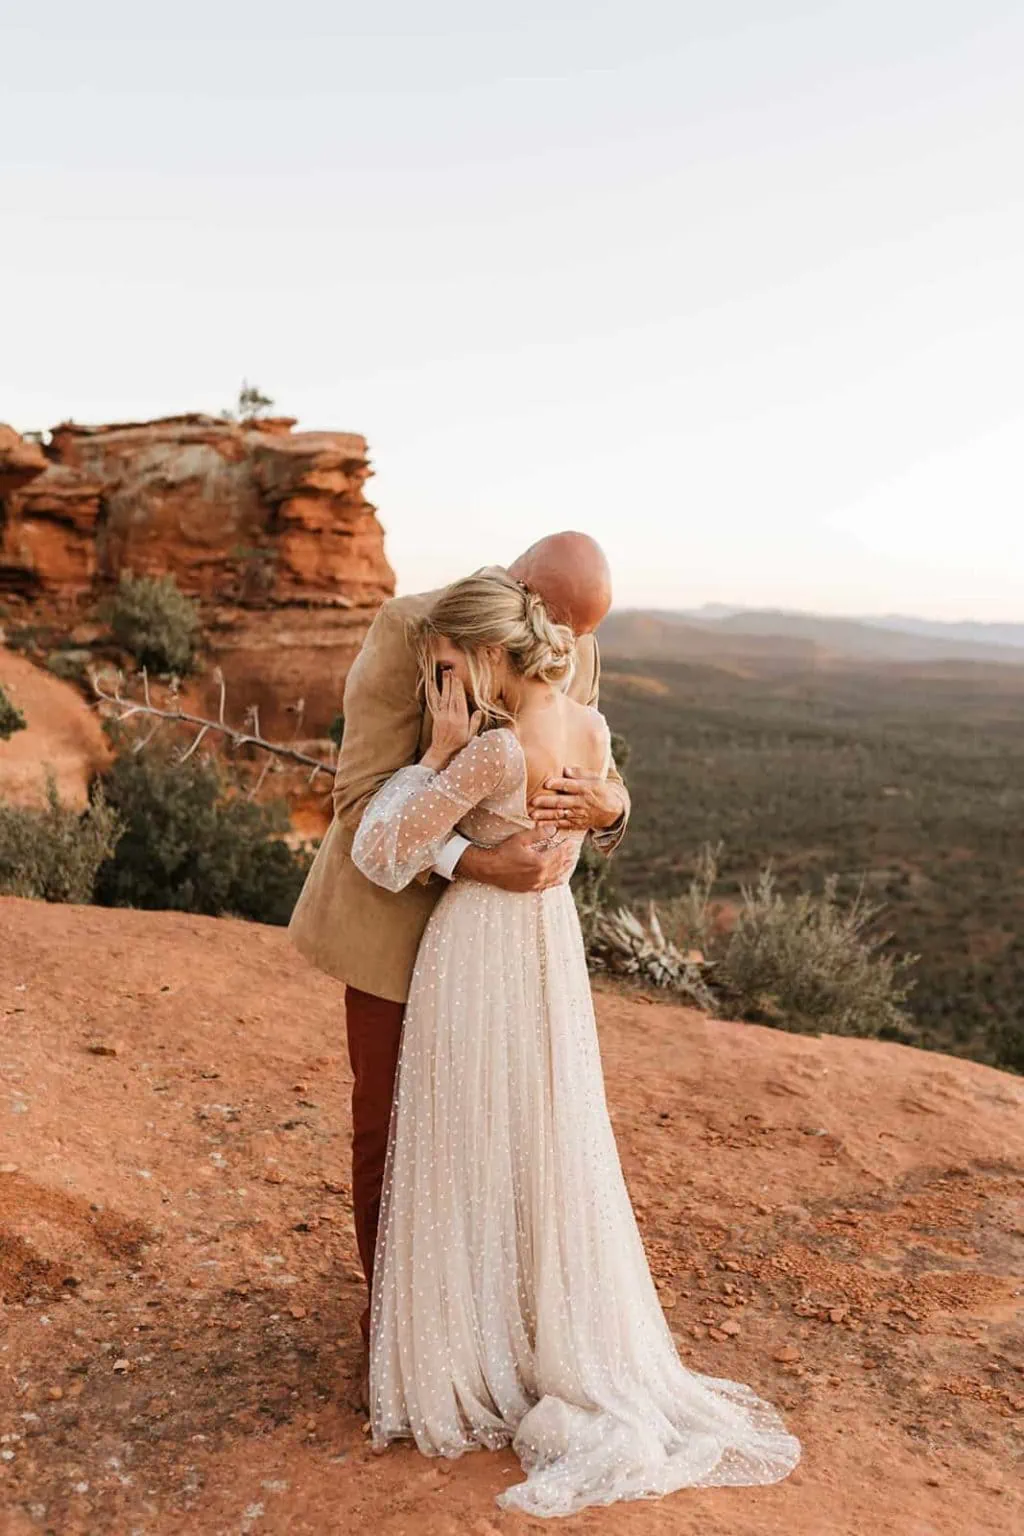 A bride wipes her tear away as her and her groom embrace each other in Sedona.